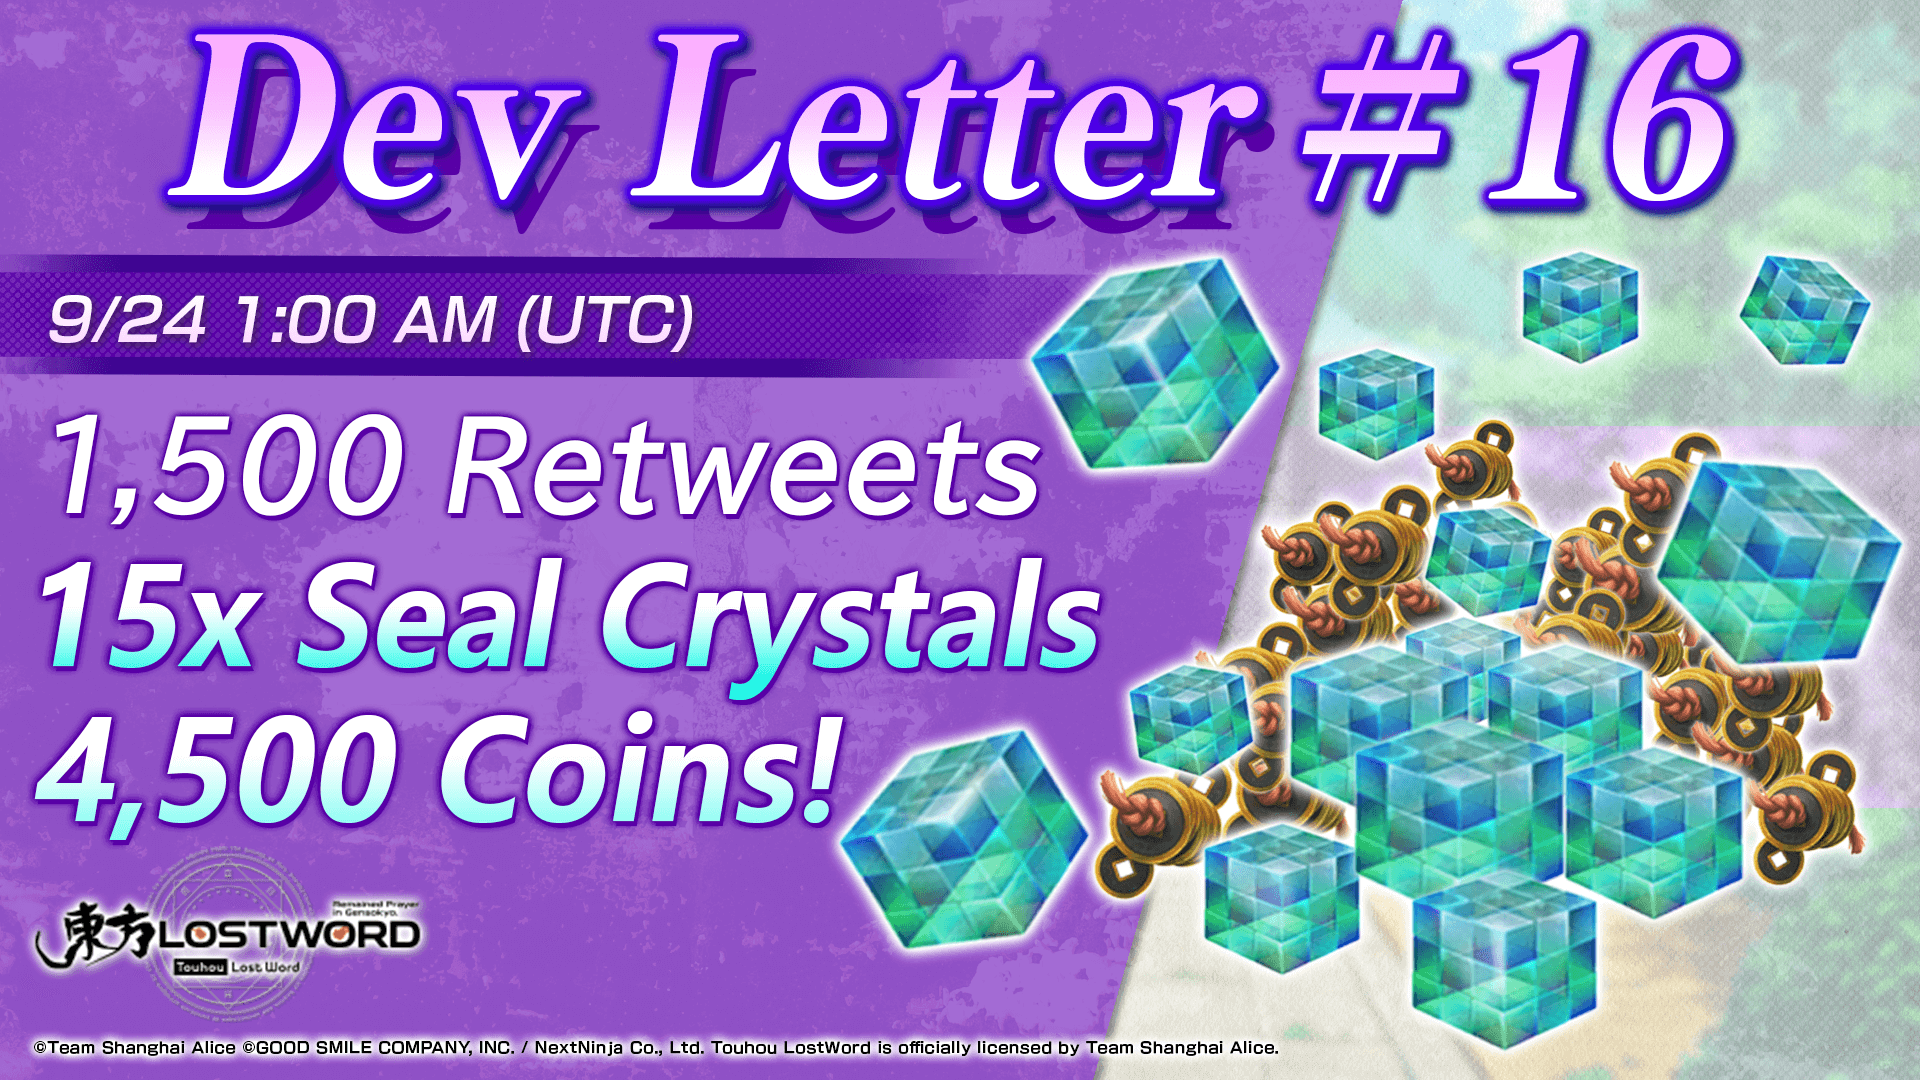 Be sure to hit that retweet button to get 15 Seal Crystals and 4,500 Coins!